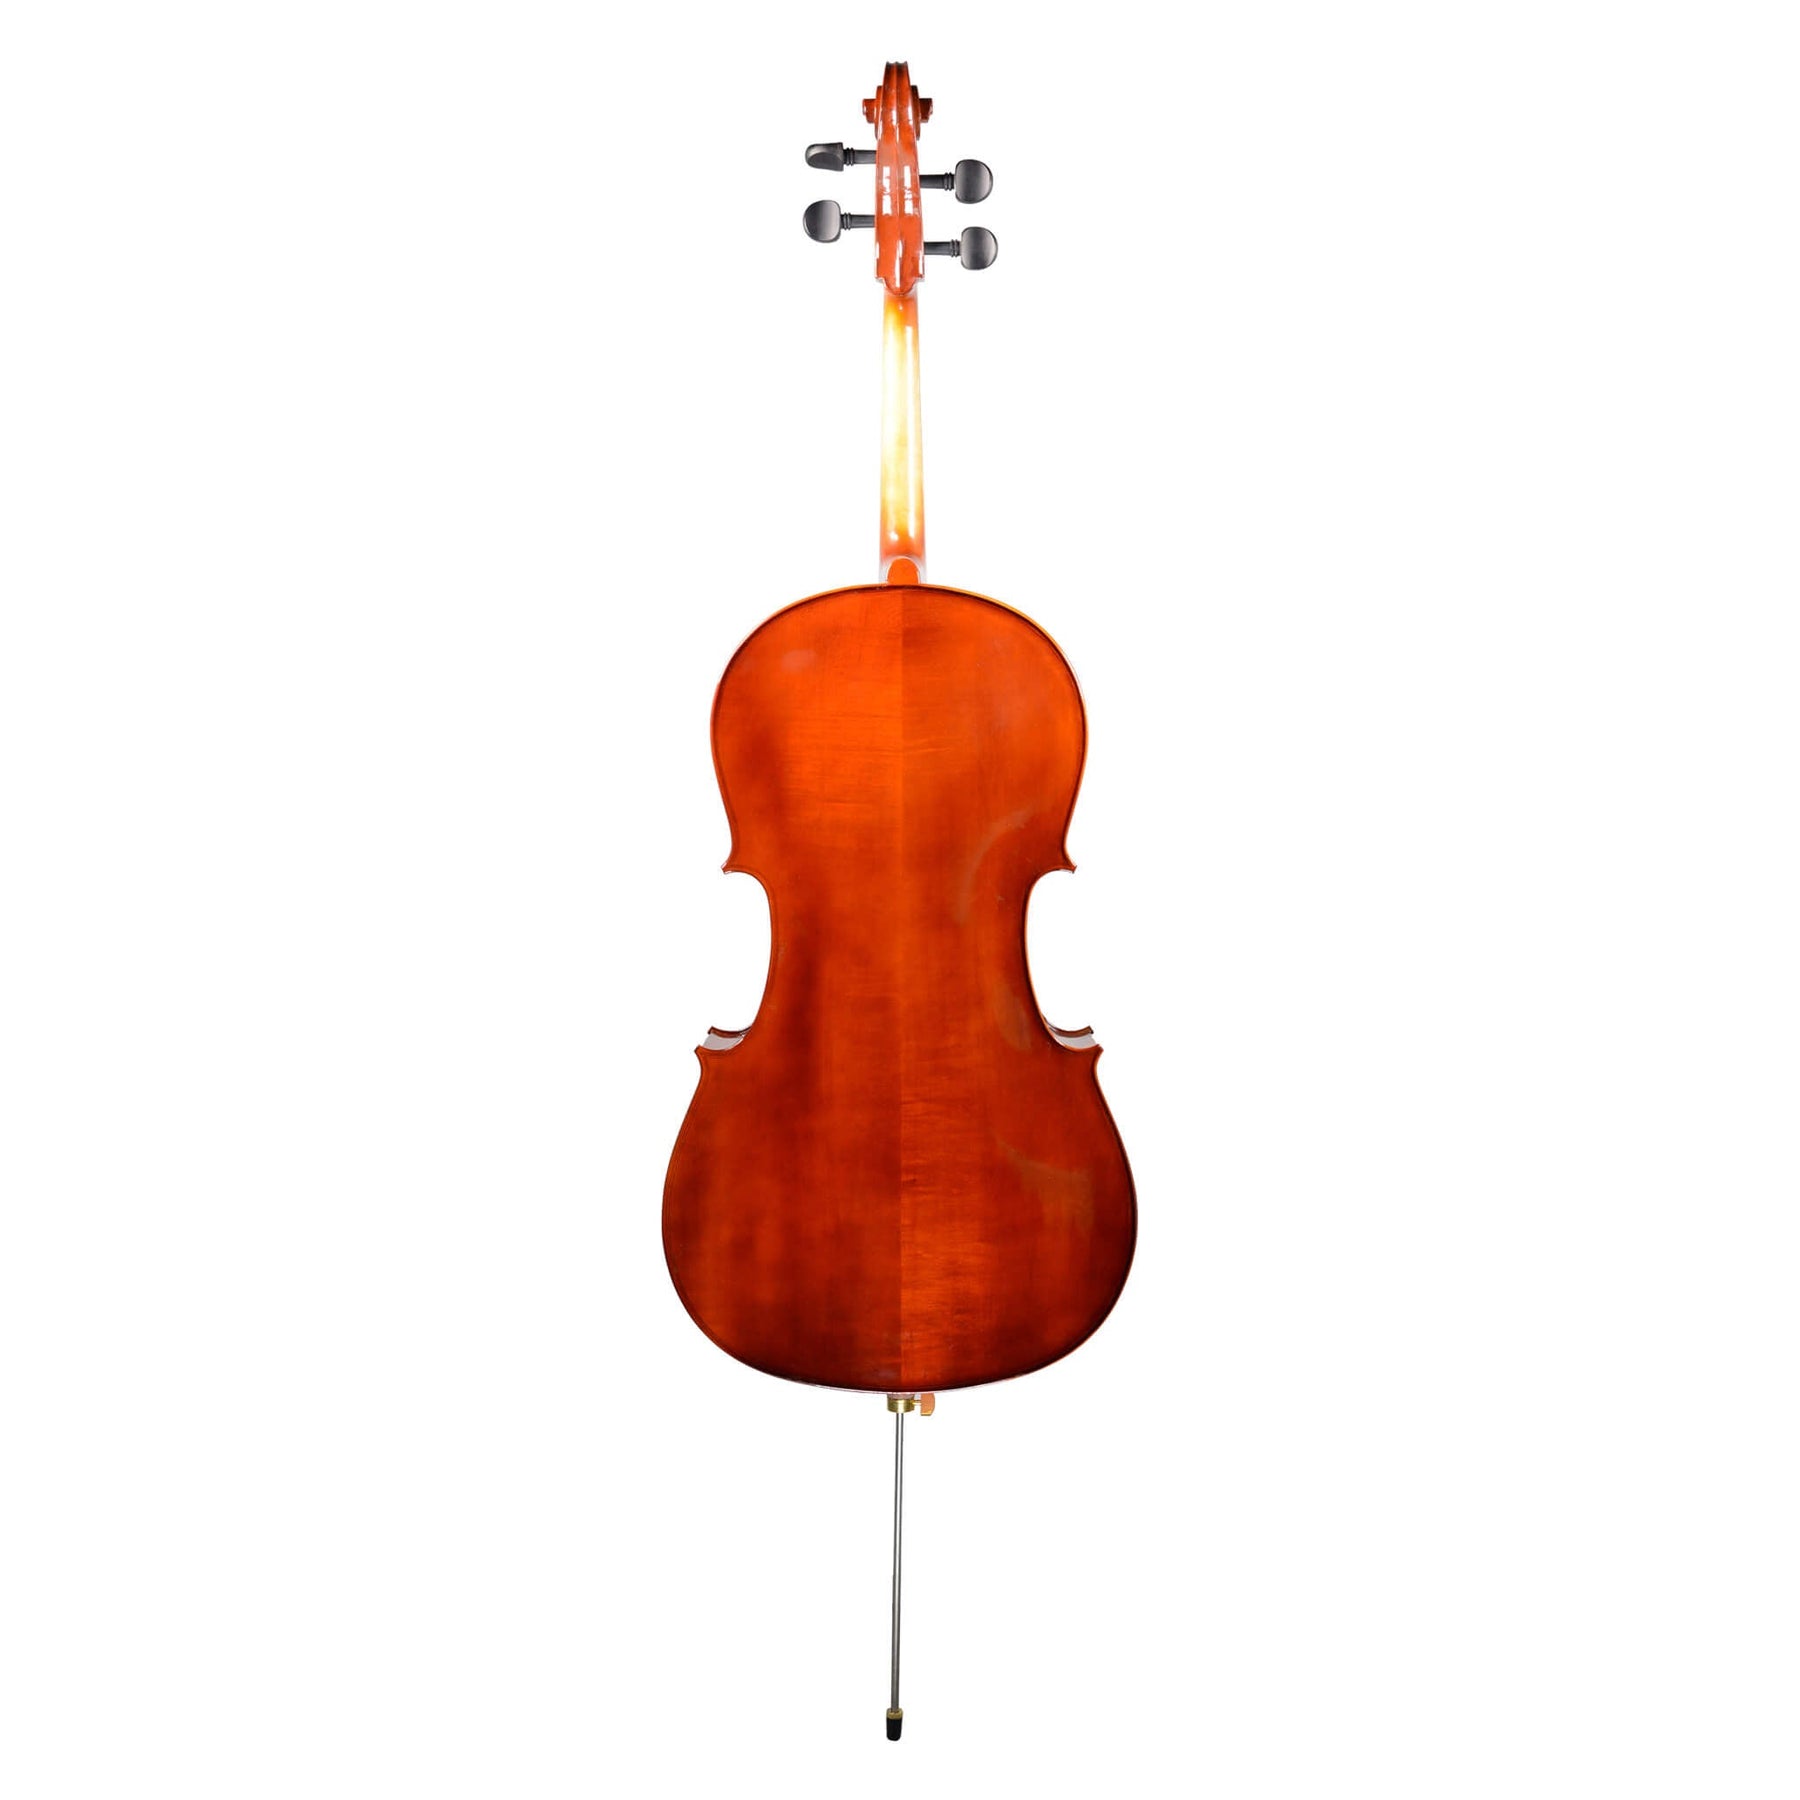 B-Stock Tower Strings Entertainer Cello Outfit